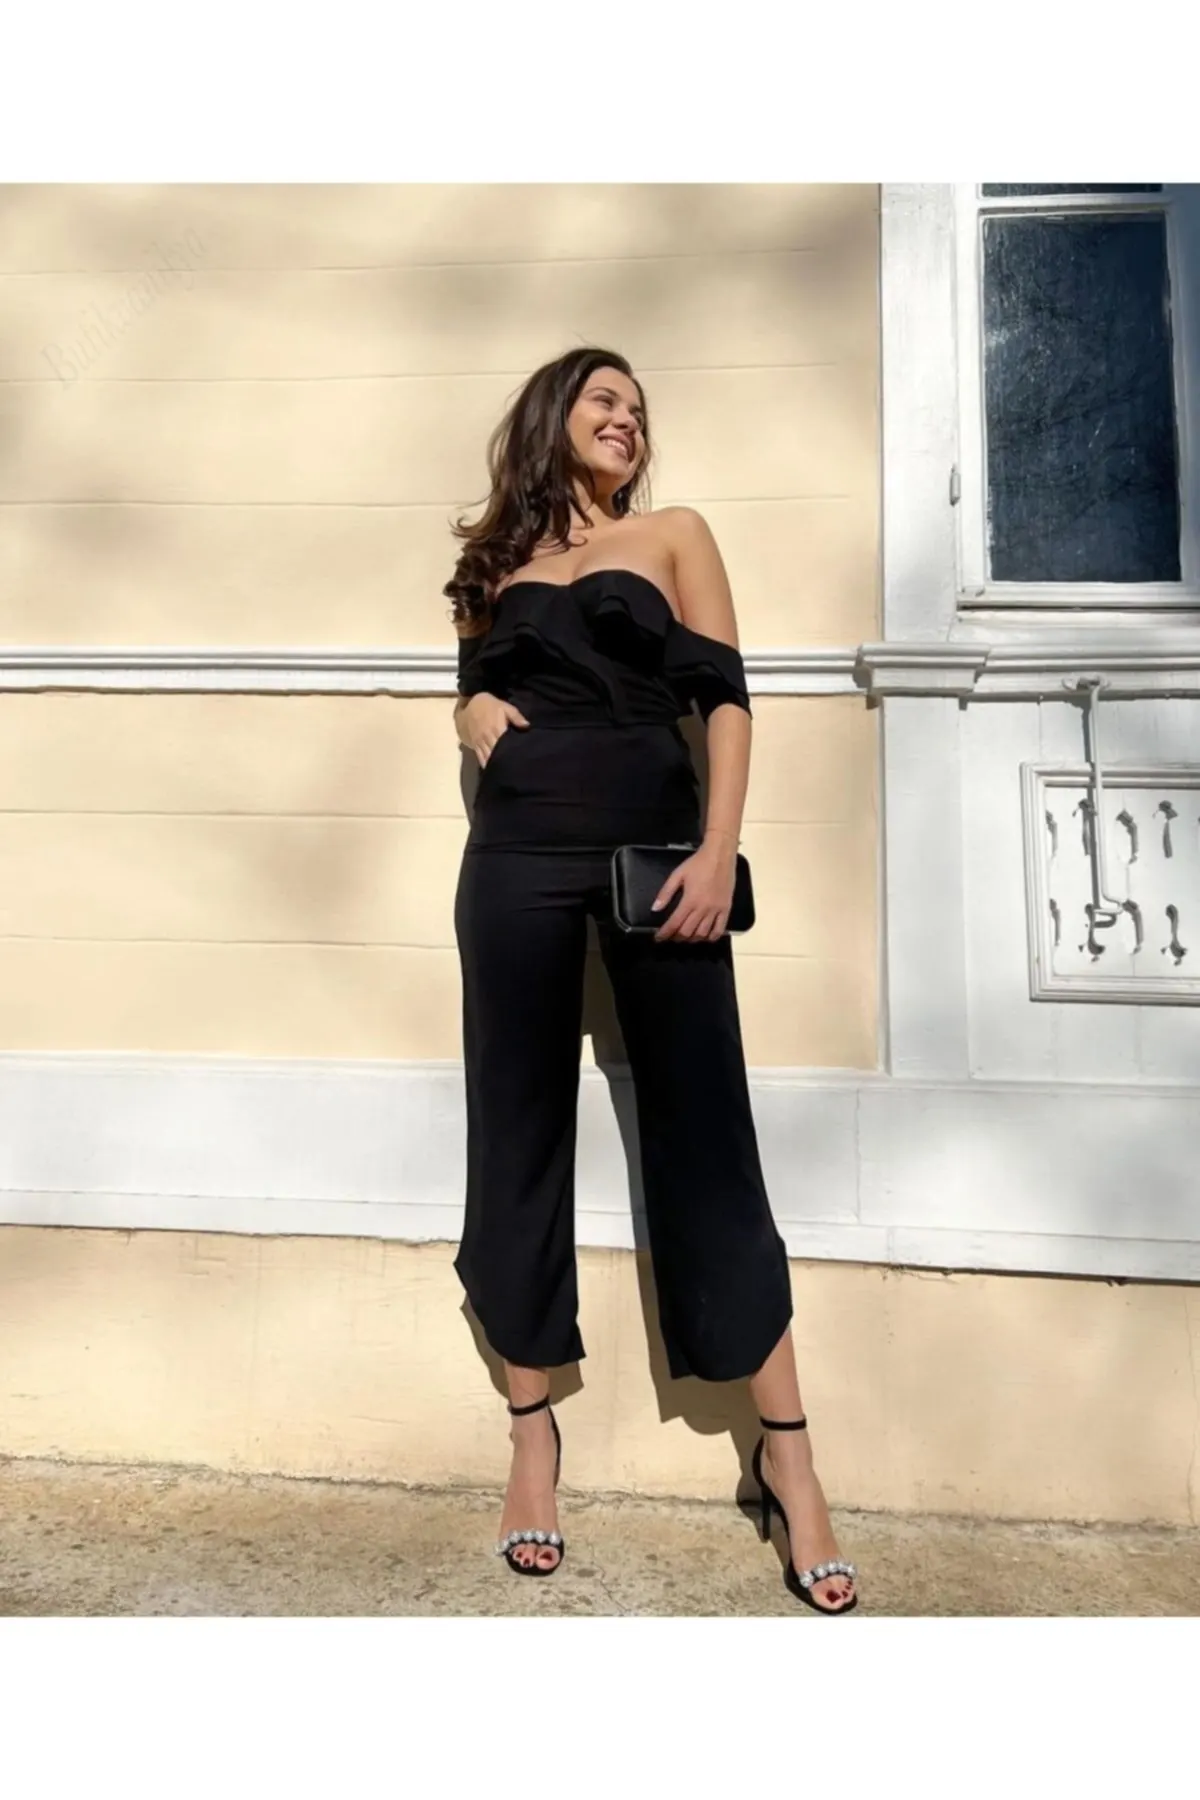 

Women's Overalls Off Shoulder Ruffle Detail Jumpsuit Hot Style Quality Fabric Sleeveless Baggy Trousers Casual Jumpsuit